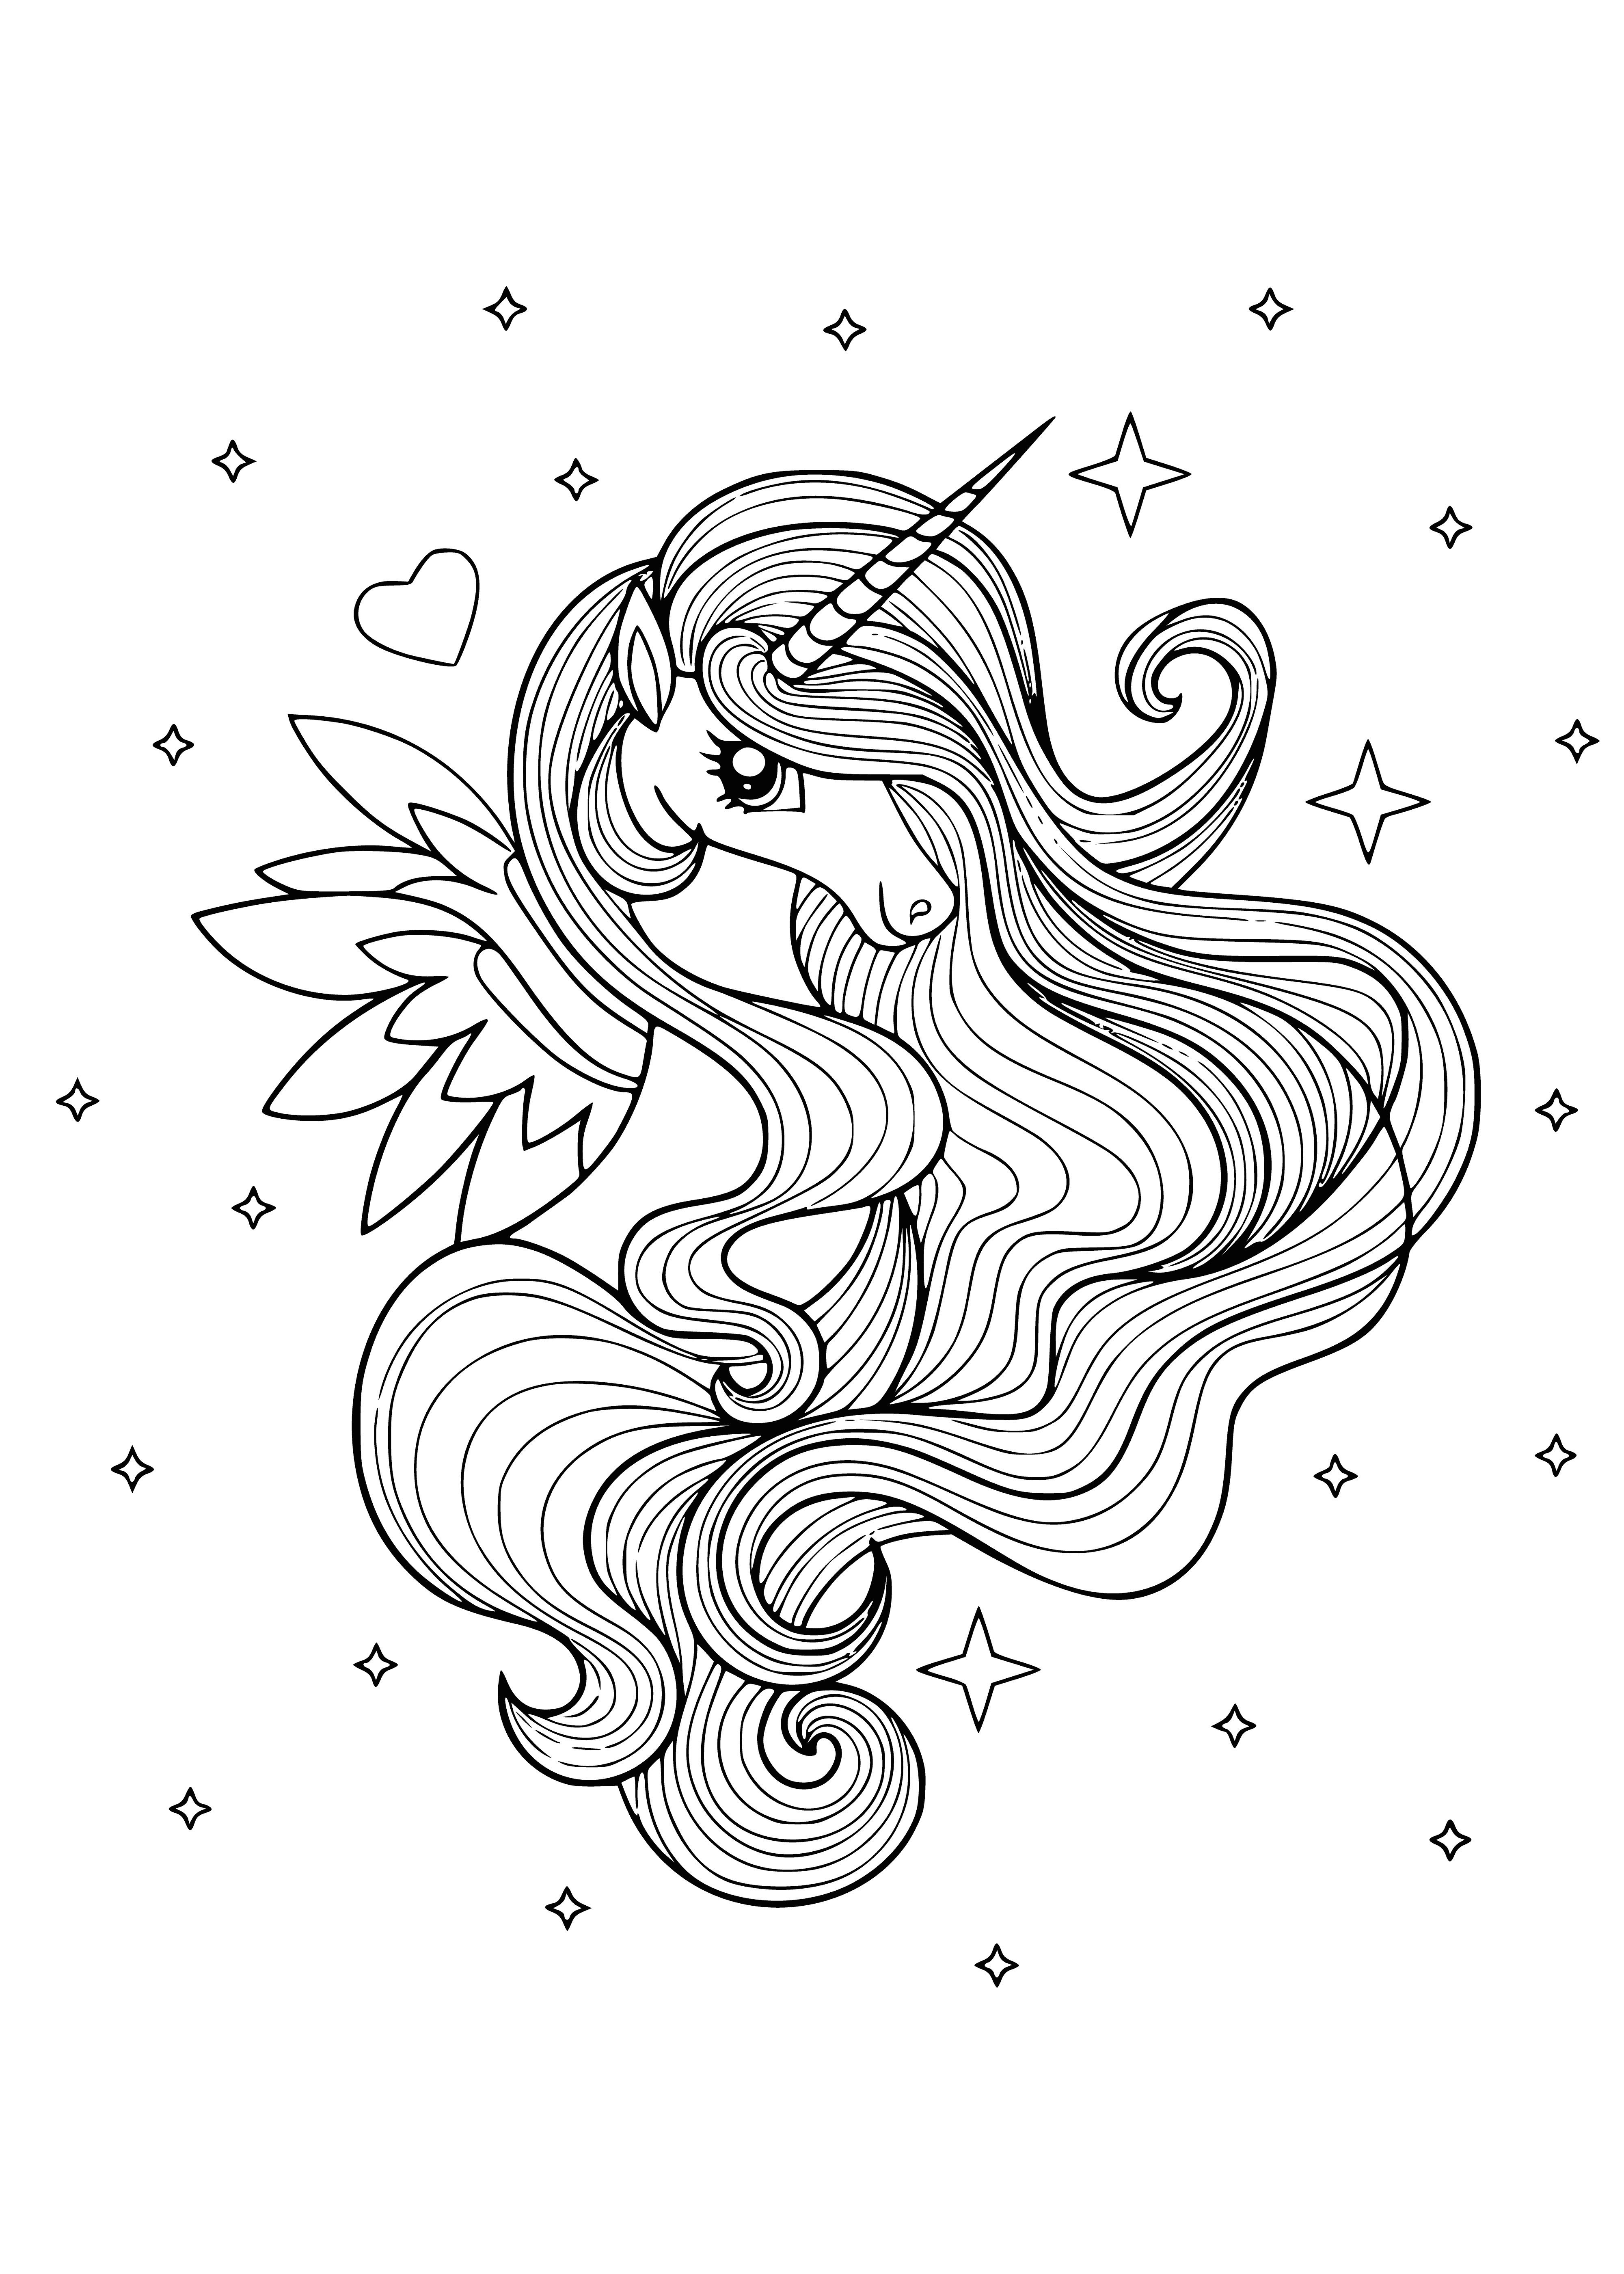 coloring page: A white unicorn flying in a rainbow sky with a long mane and tail. #antistresscoloring